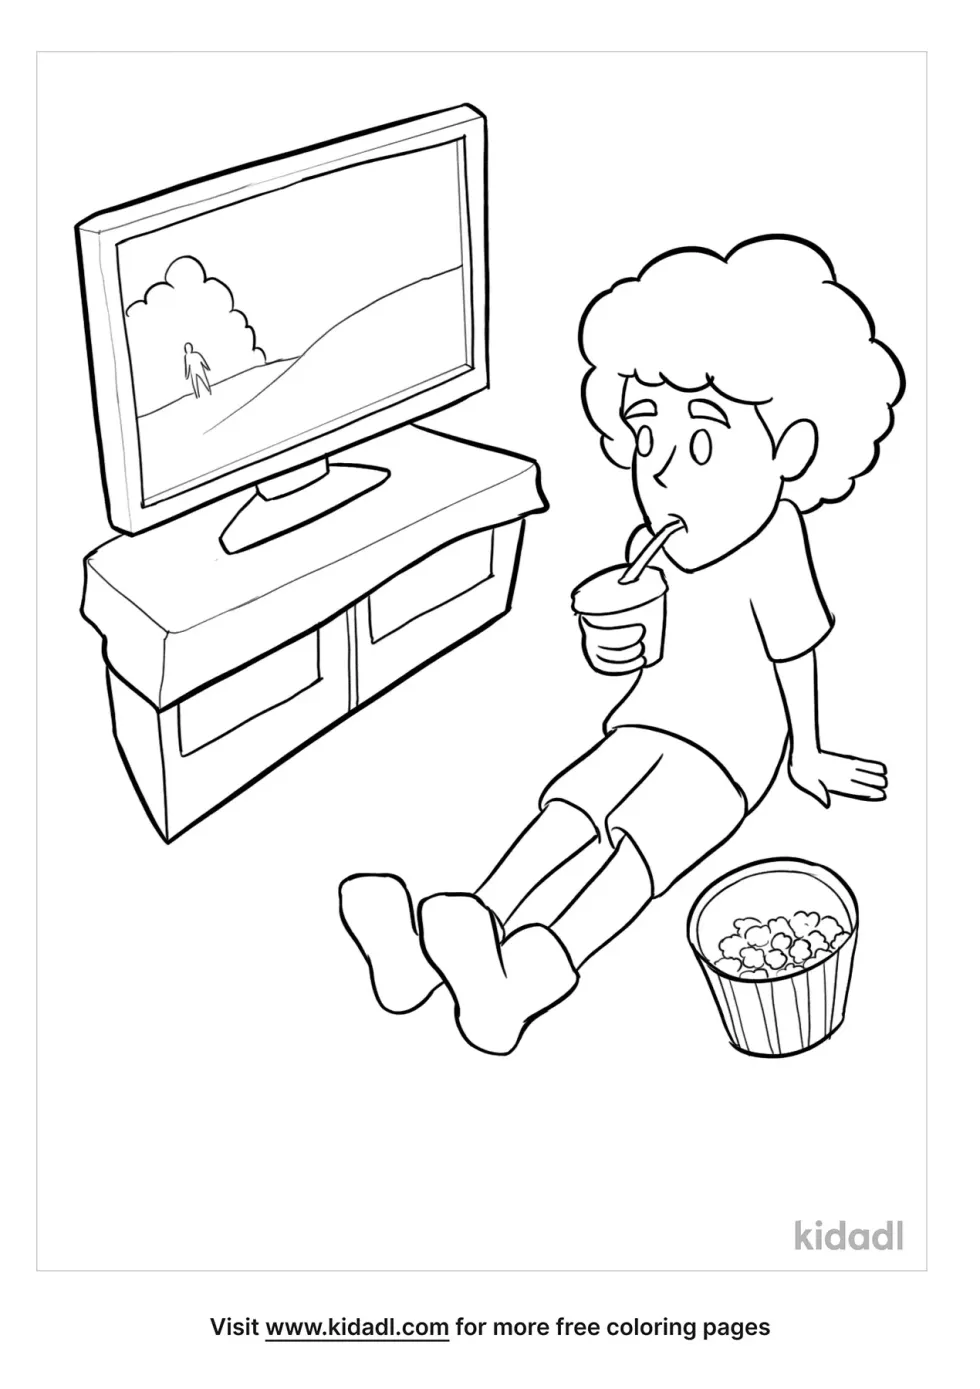 Watching A Movie Coloring Page